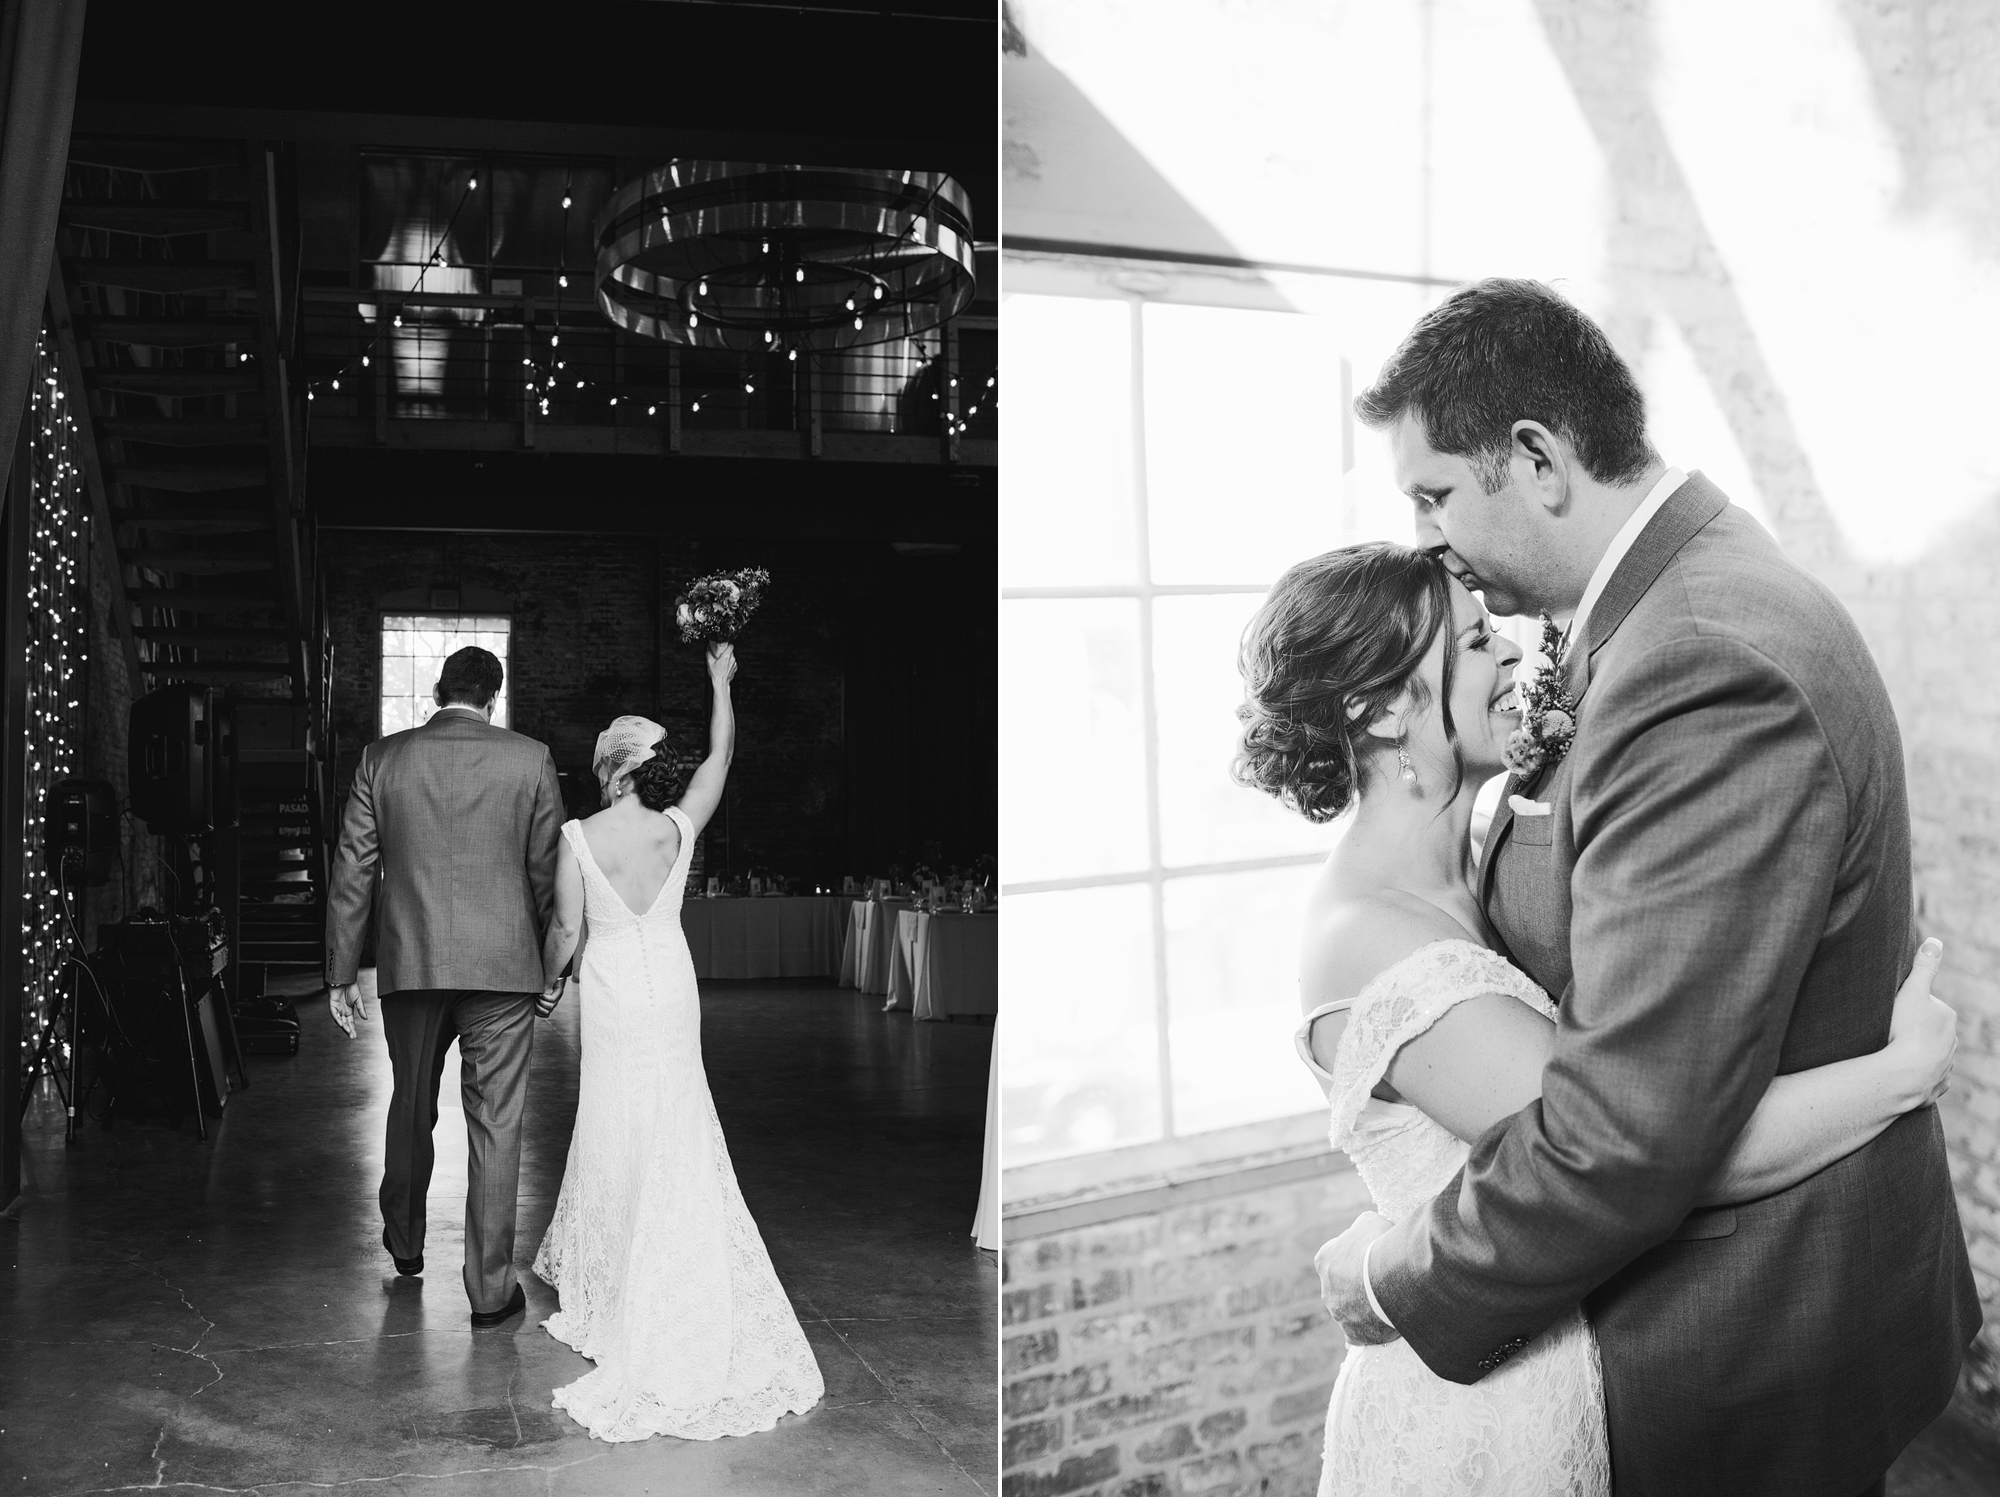 These are photos of Rachel and Seth right after the ceremony.